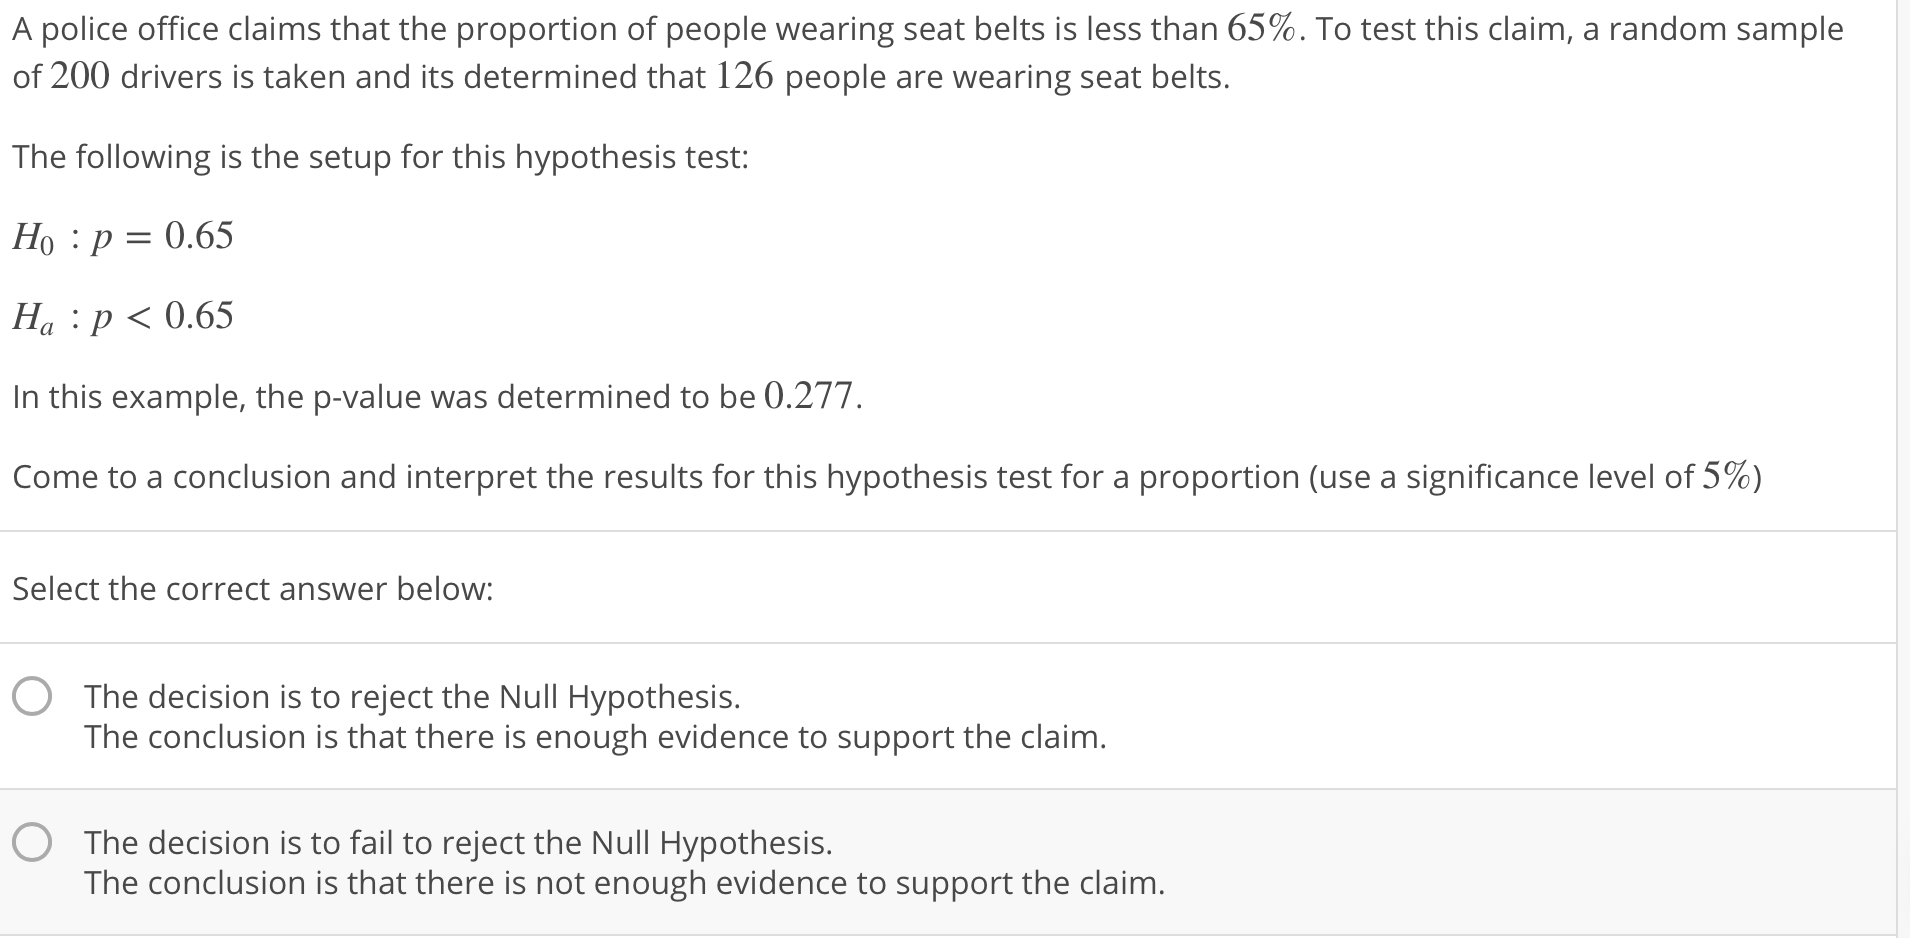 A police office claims that the proportion of people wearing seat belts is less than 65%. To test this claim, a random sample
of 200 drivers is taken and its determined that 126 people are wearing seat belts.
The following is the setup for this hypothesis test:
Ho :p-0.65
Ha : p < 0.65
In this example, the p-value was determined to be 0.277
come to a conclusion and interpret the results for this hypothesis test for a proportion (use a significance level of 5%)
Select the correct answer below:
O The decision is to reject the Null Hypothesis.
The conclusion is that there is enough evidence to support the claim
The decision is to fail to reject the Null Hypothesis.
The conclusion is that there is not enough evidence to support the claim
